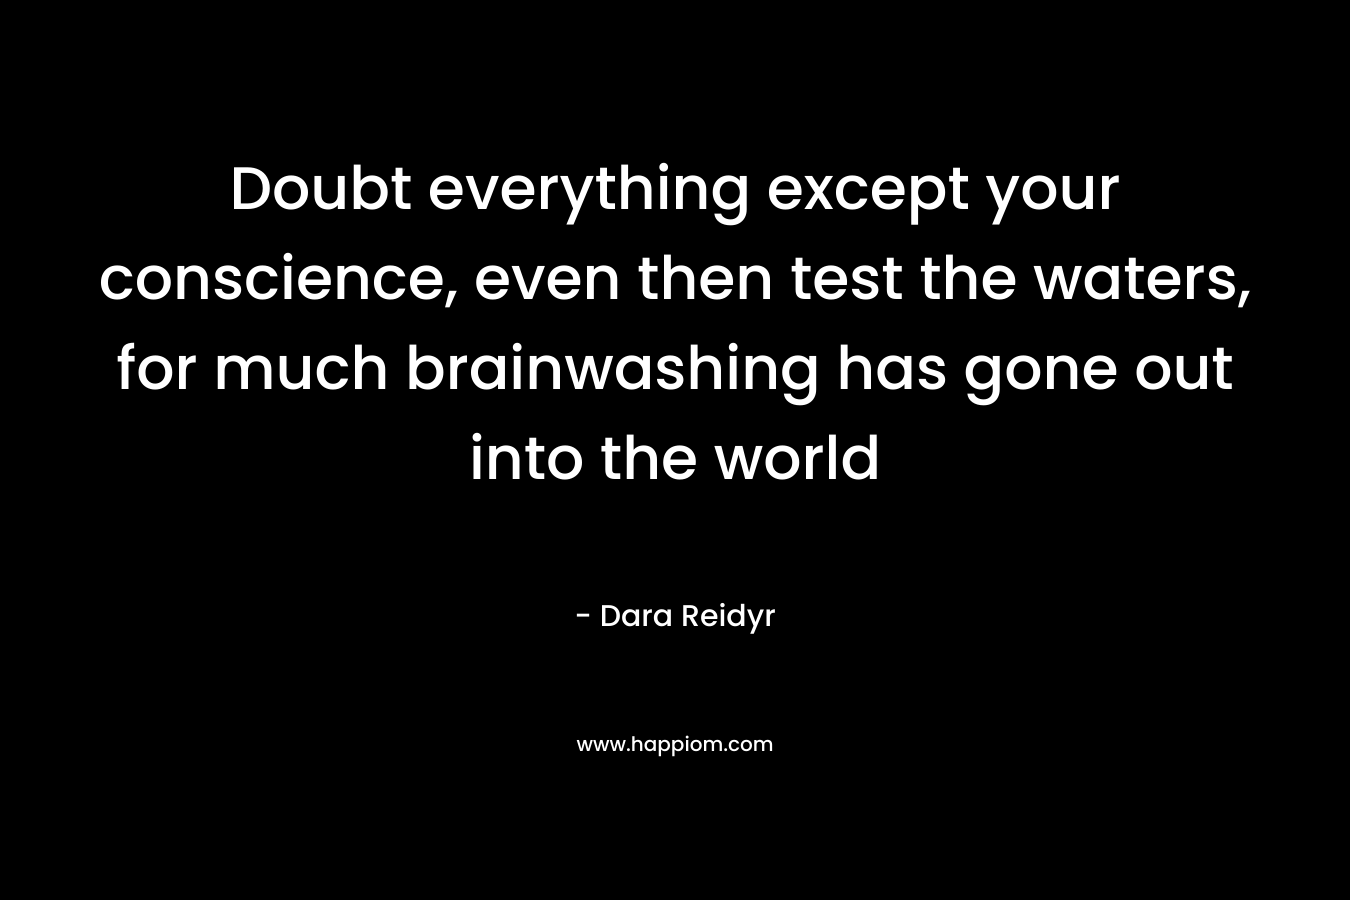 Doubt everything except your conscience, even then test the waters, for much brainwashing has gone out into the world – Dara Reidyr